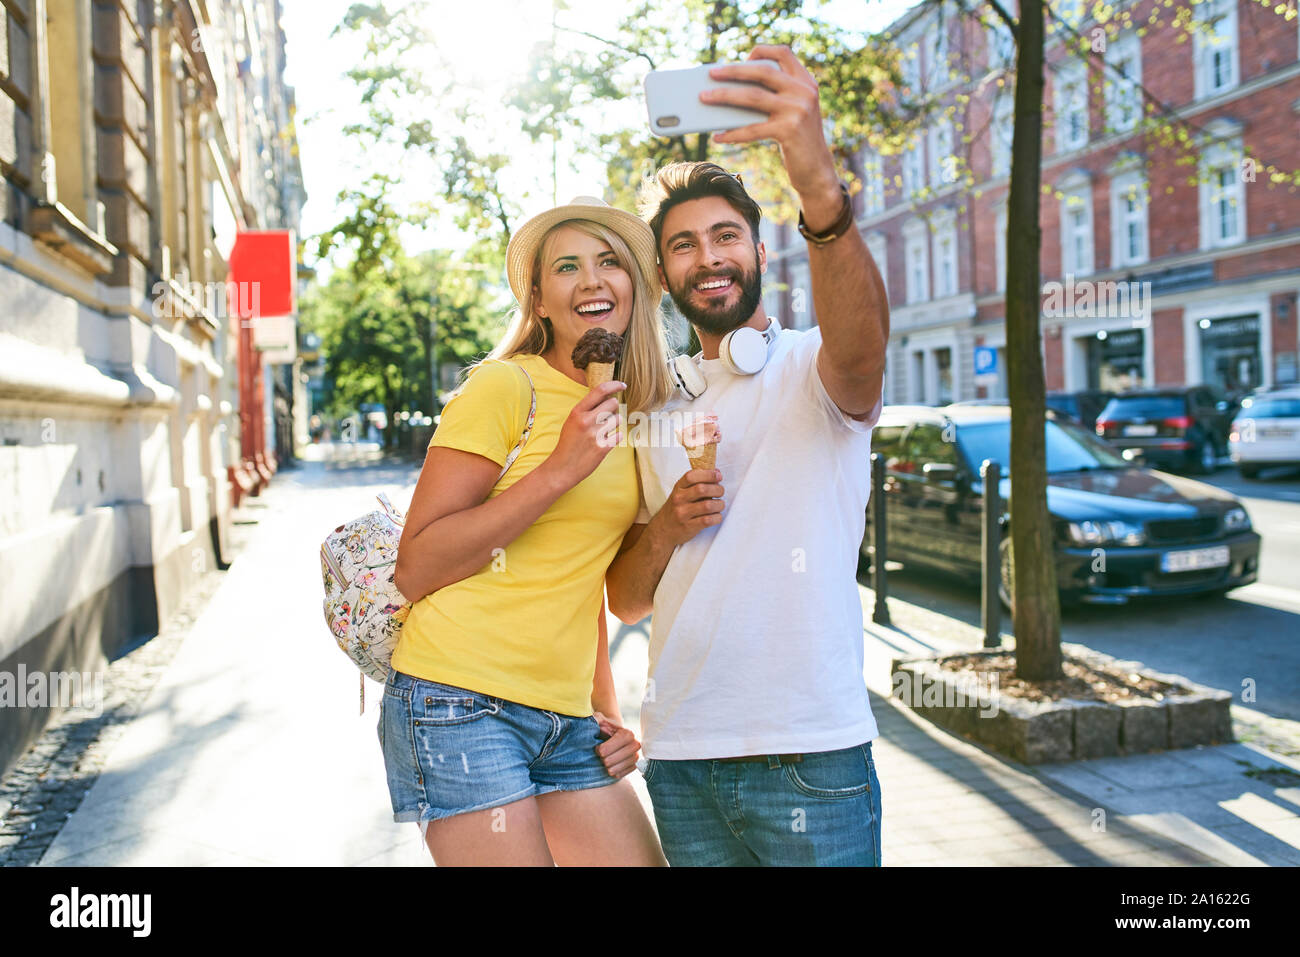 Happy young couple taking a selfie while eating ice cream in the city Stock Photo